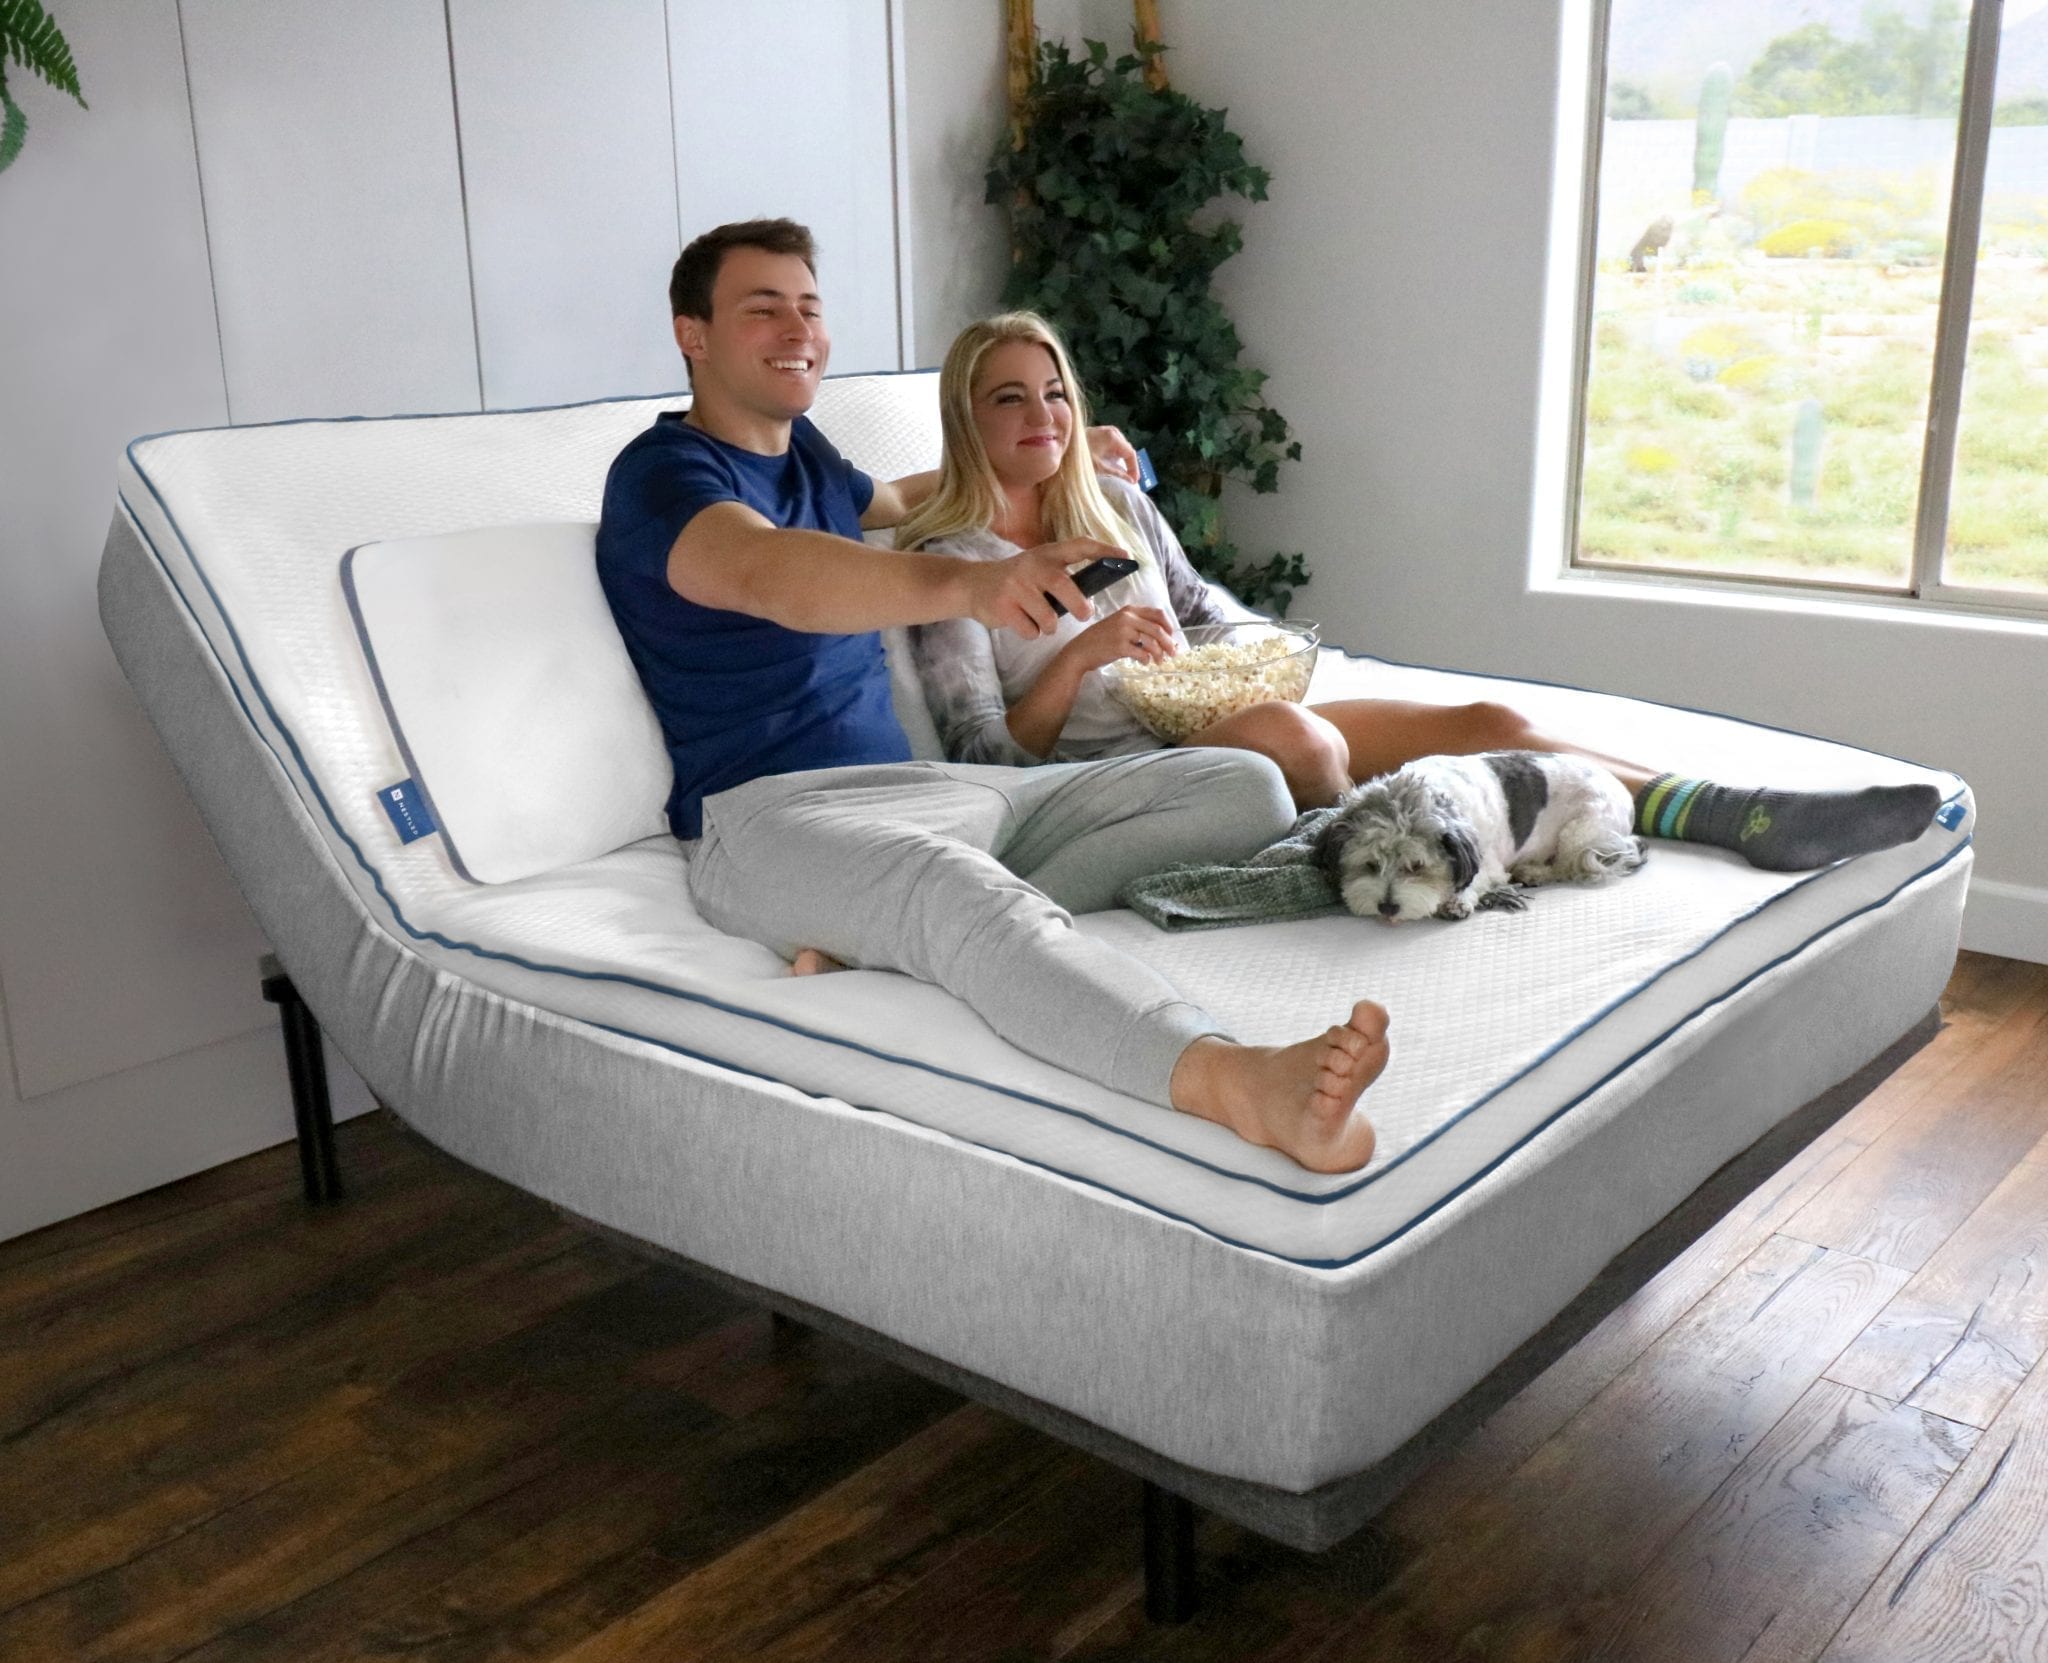 A couple happily watching TV on their Nestled topper and motion base with their cute dog.